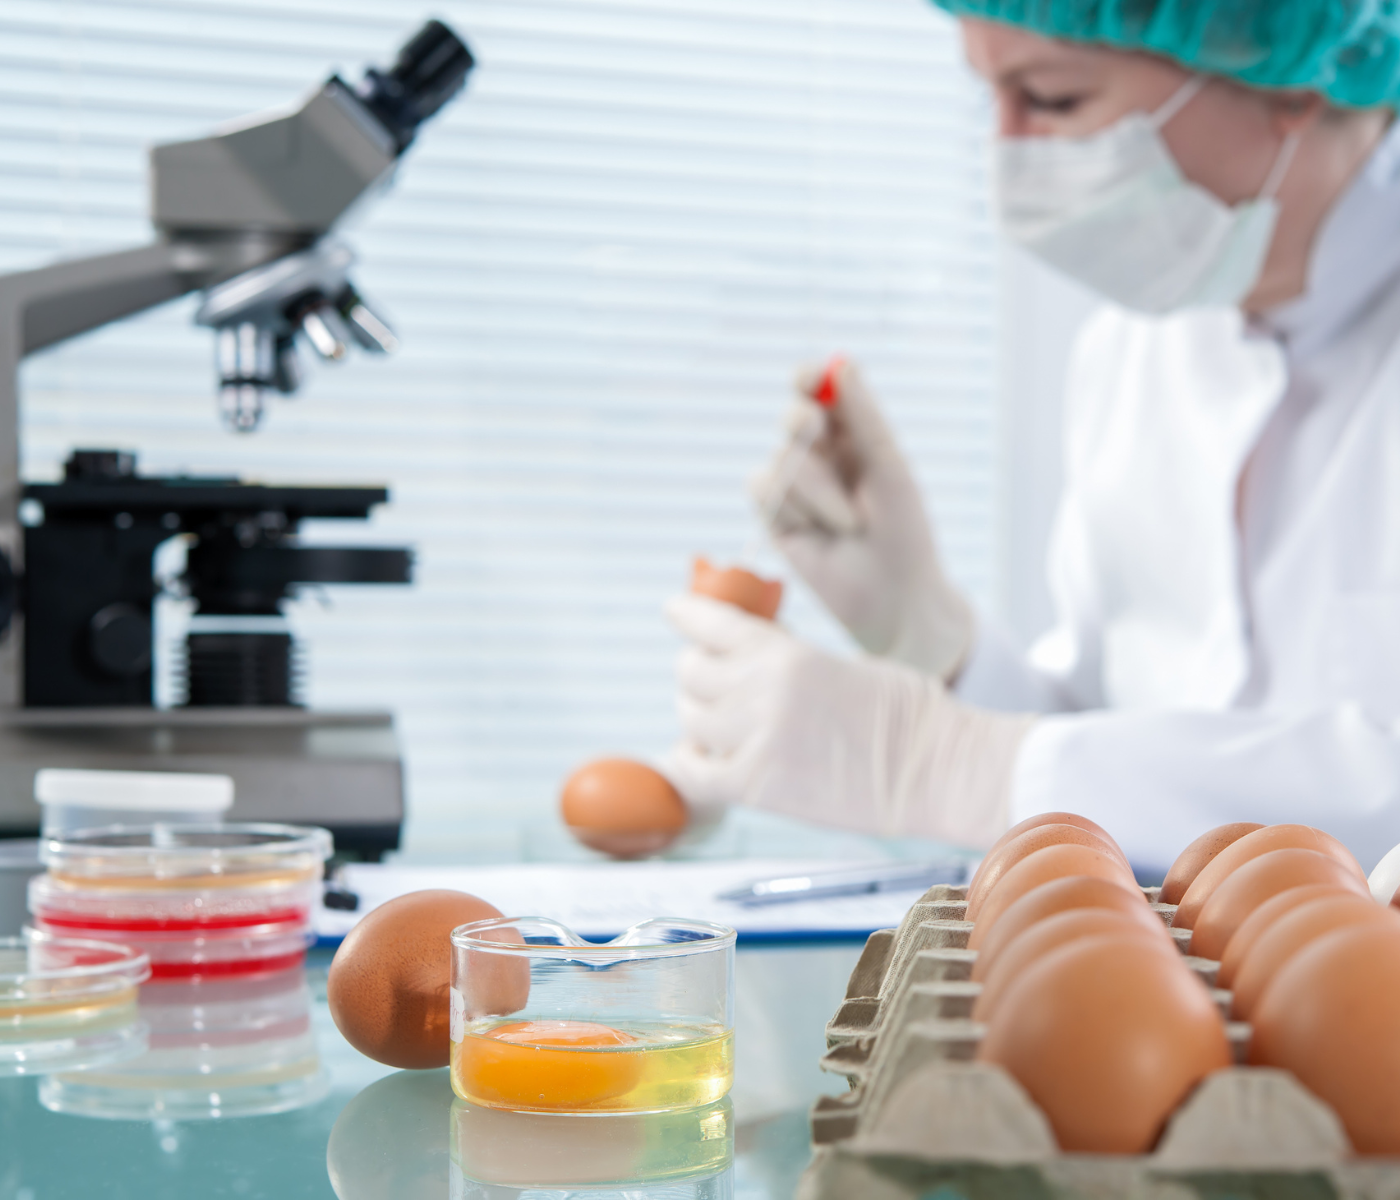 The FDA released a guide for egg producers to prevent Salmonella